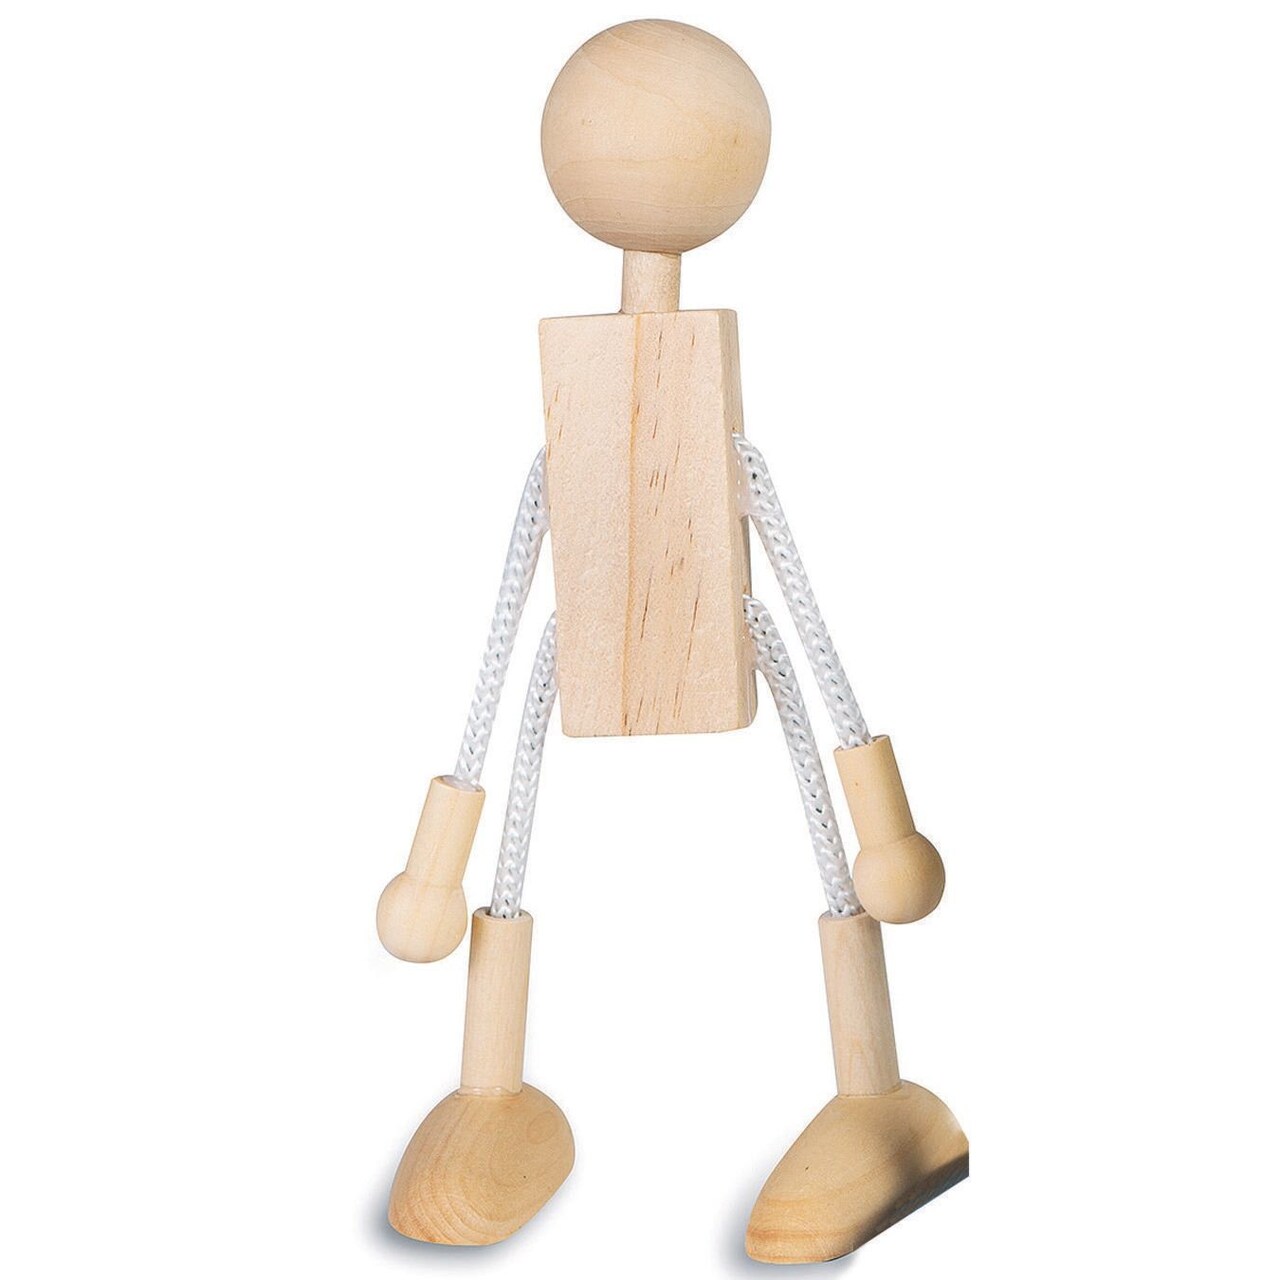 Unfinished Posable Wood Dolls (Pack of 6)